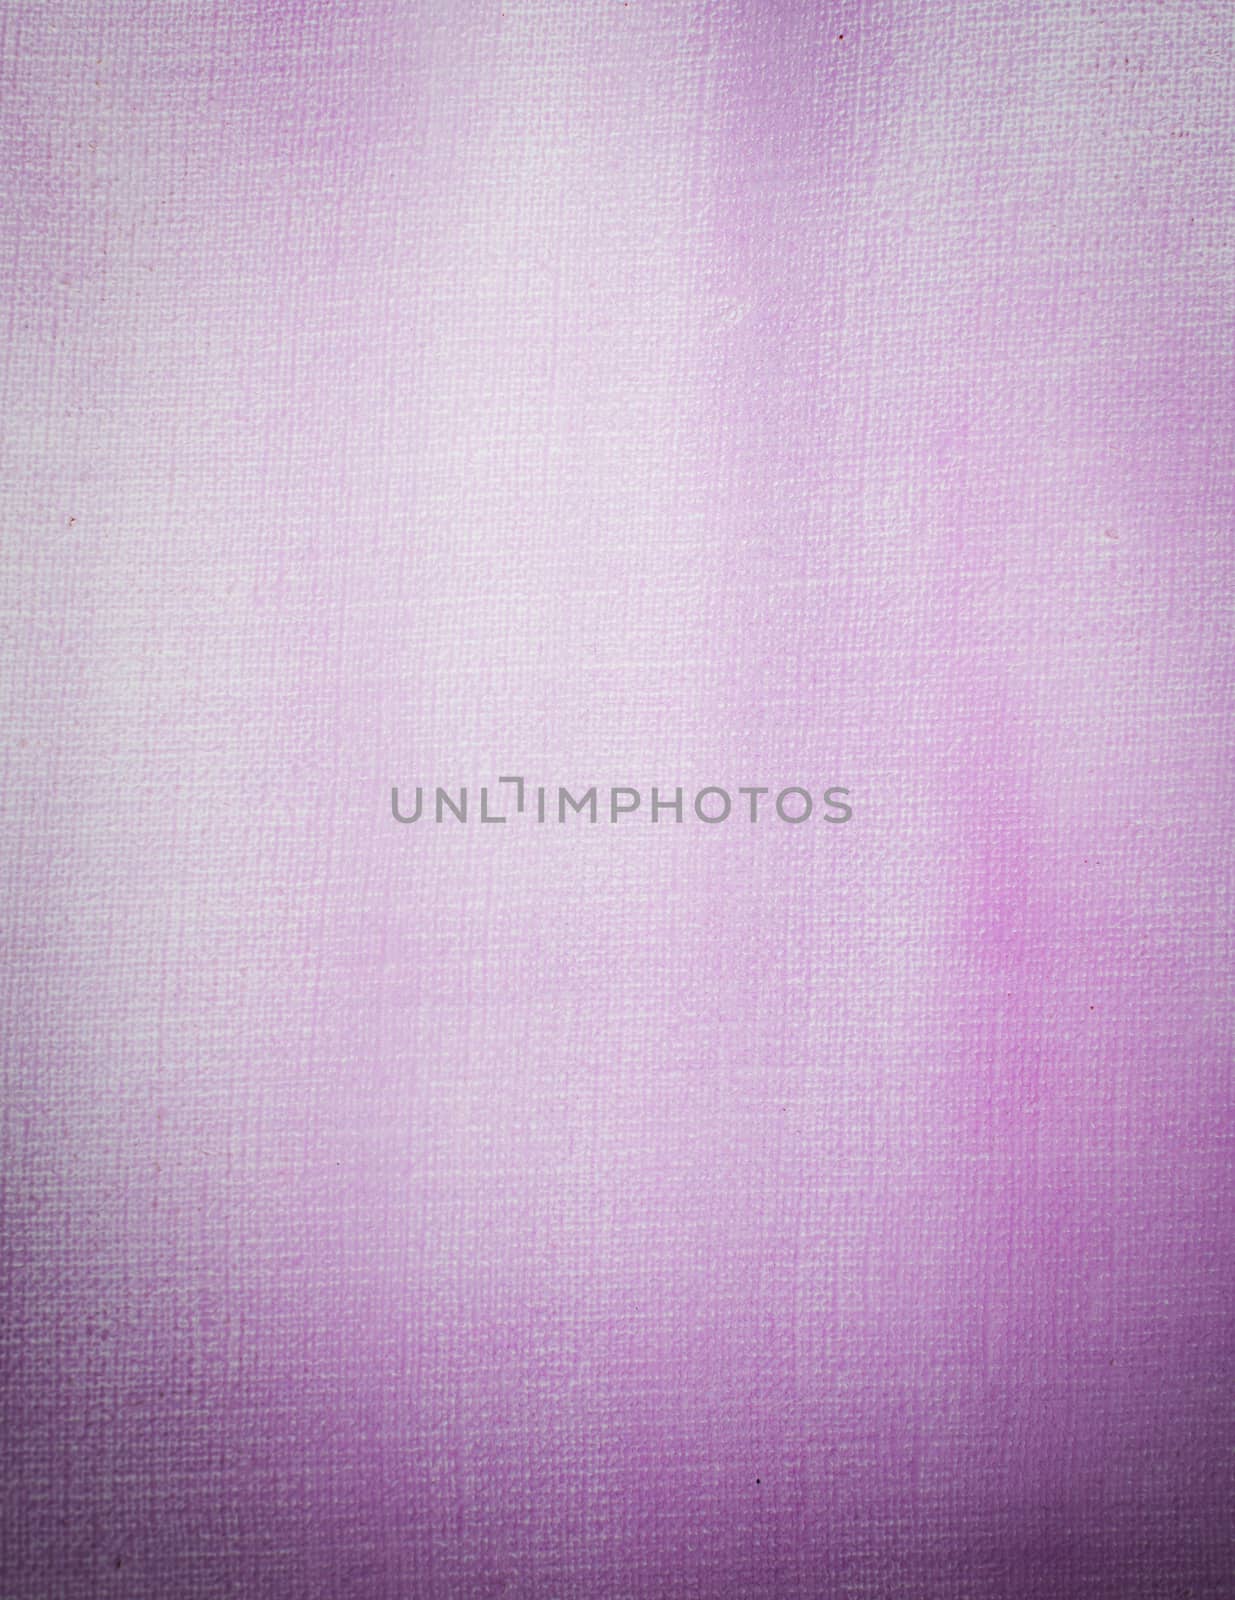 Light pink canvas background by ArtesiaWells